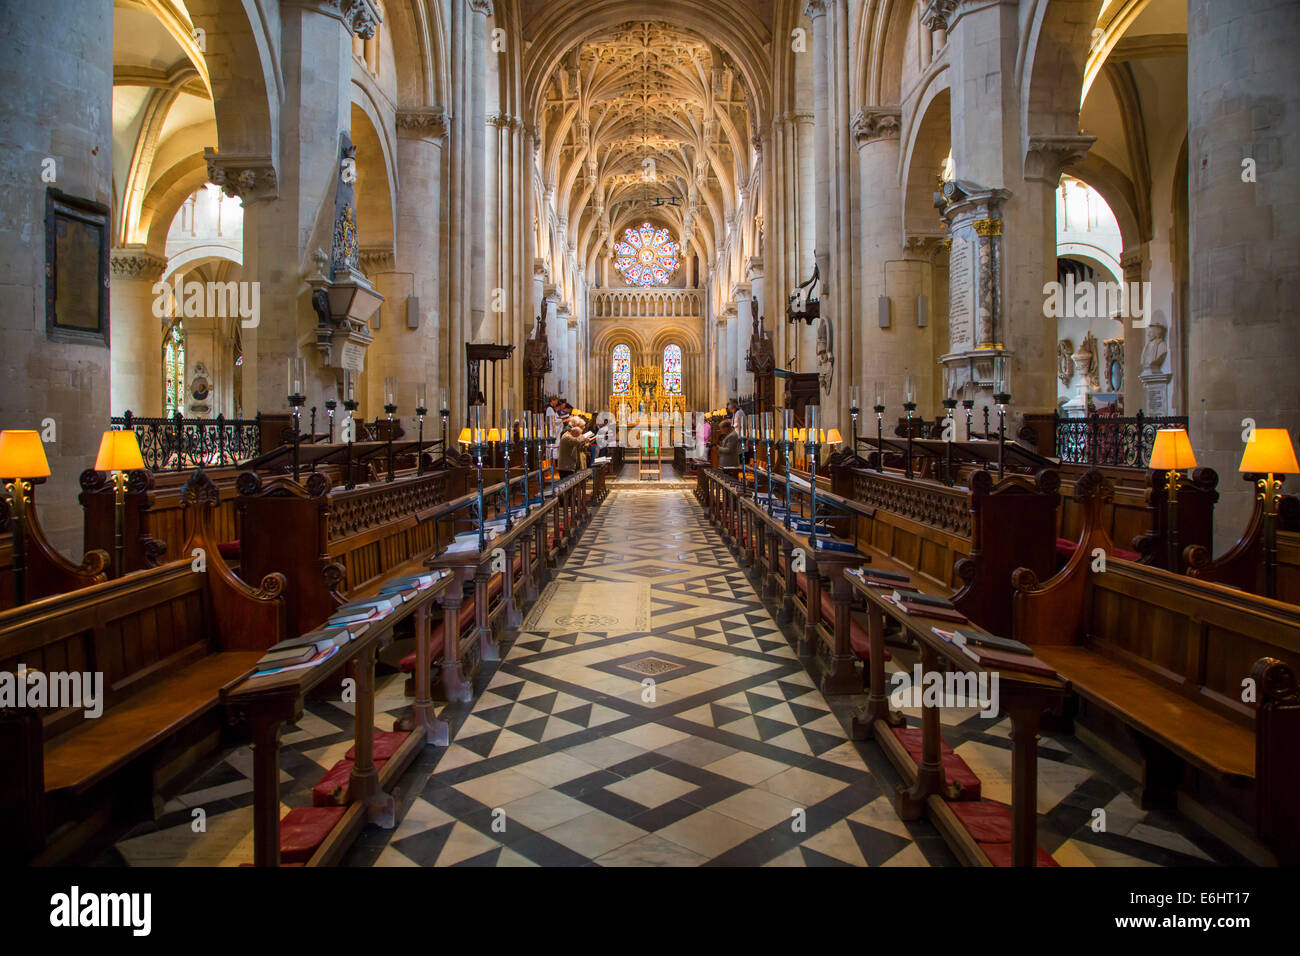 Interior of Christ Church - founded 1524 by Cardinal Wolsey, Re-founded in 1546 by Henry VIII, Oxford University, England Stock Photo